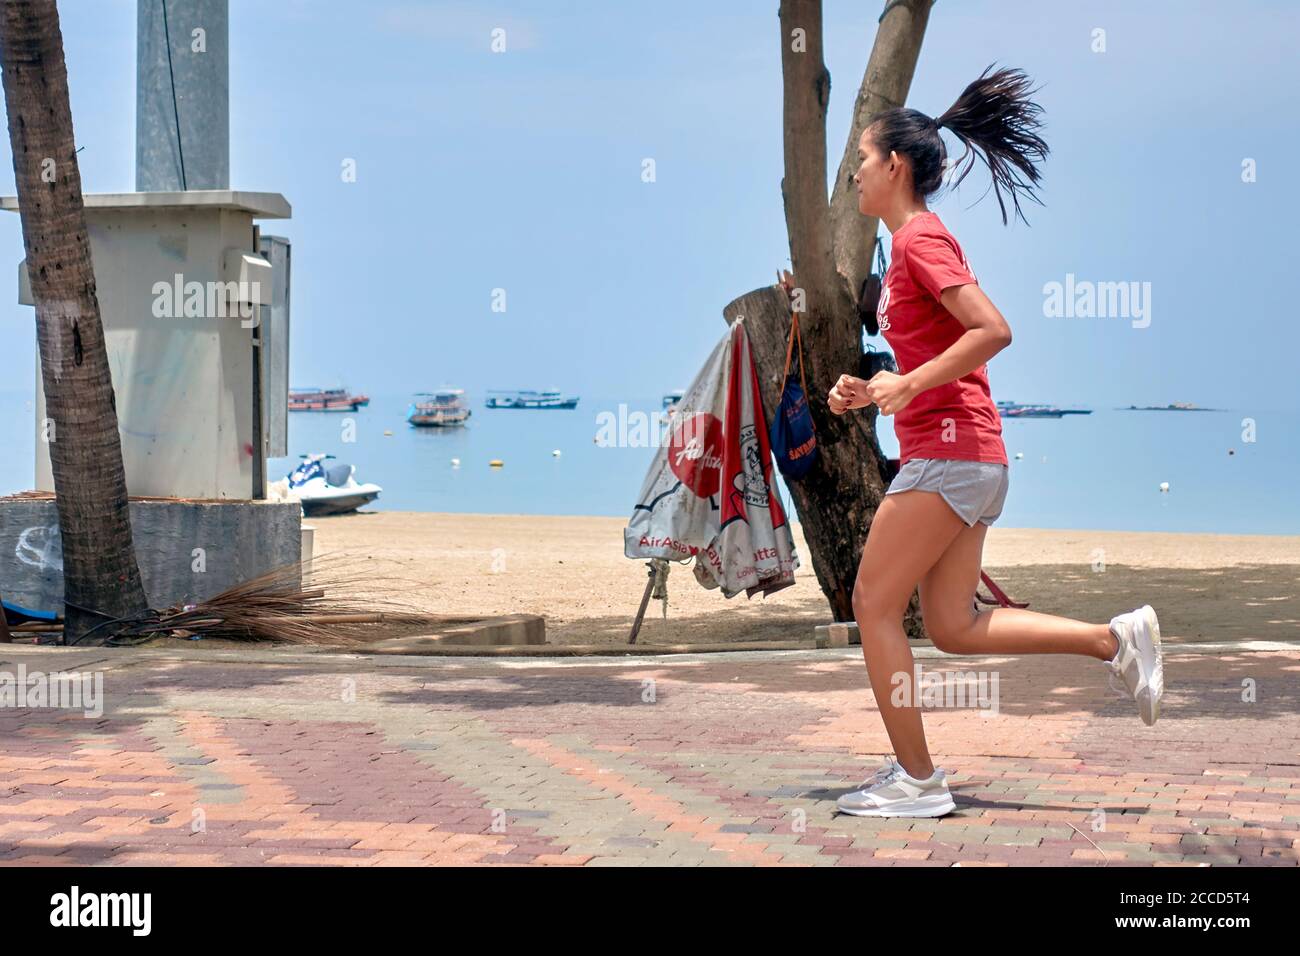 Woman running alongside the beach,  female keep fit exercise. People exercising. Thailand Southeast Asia Stock Photo